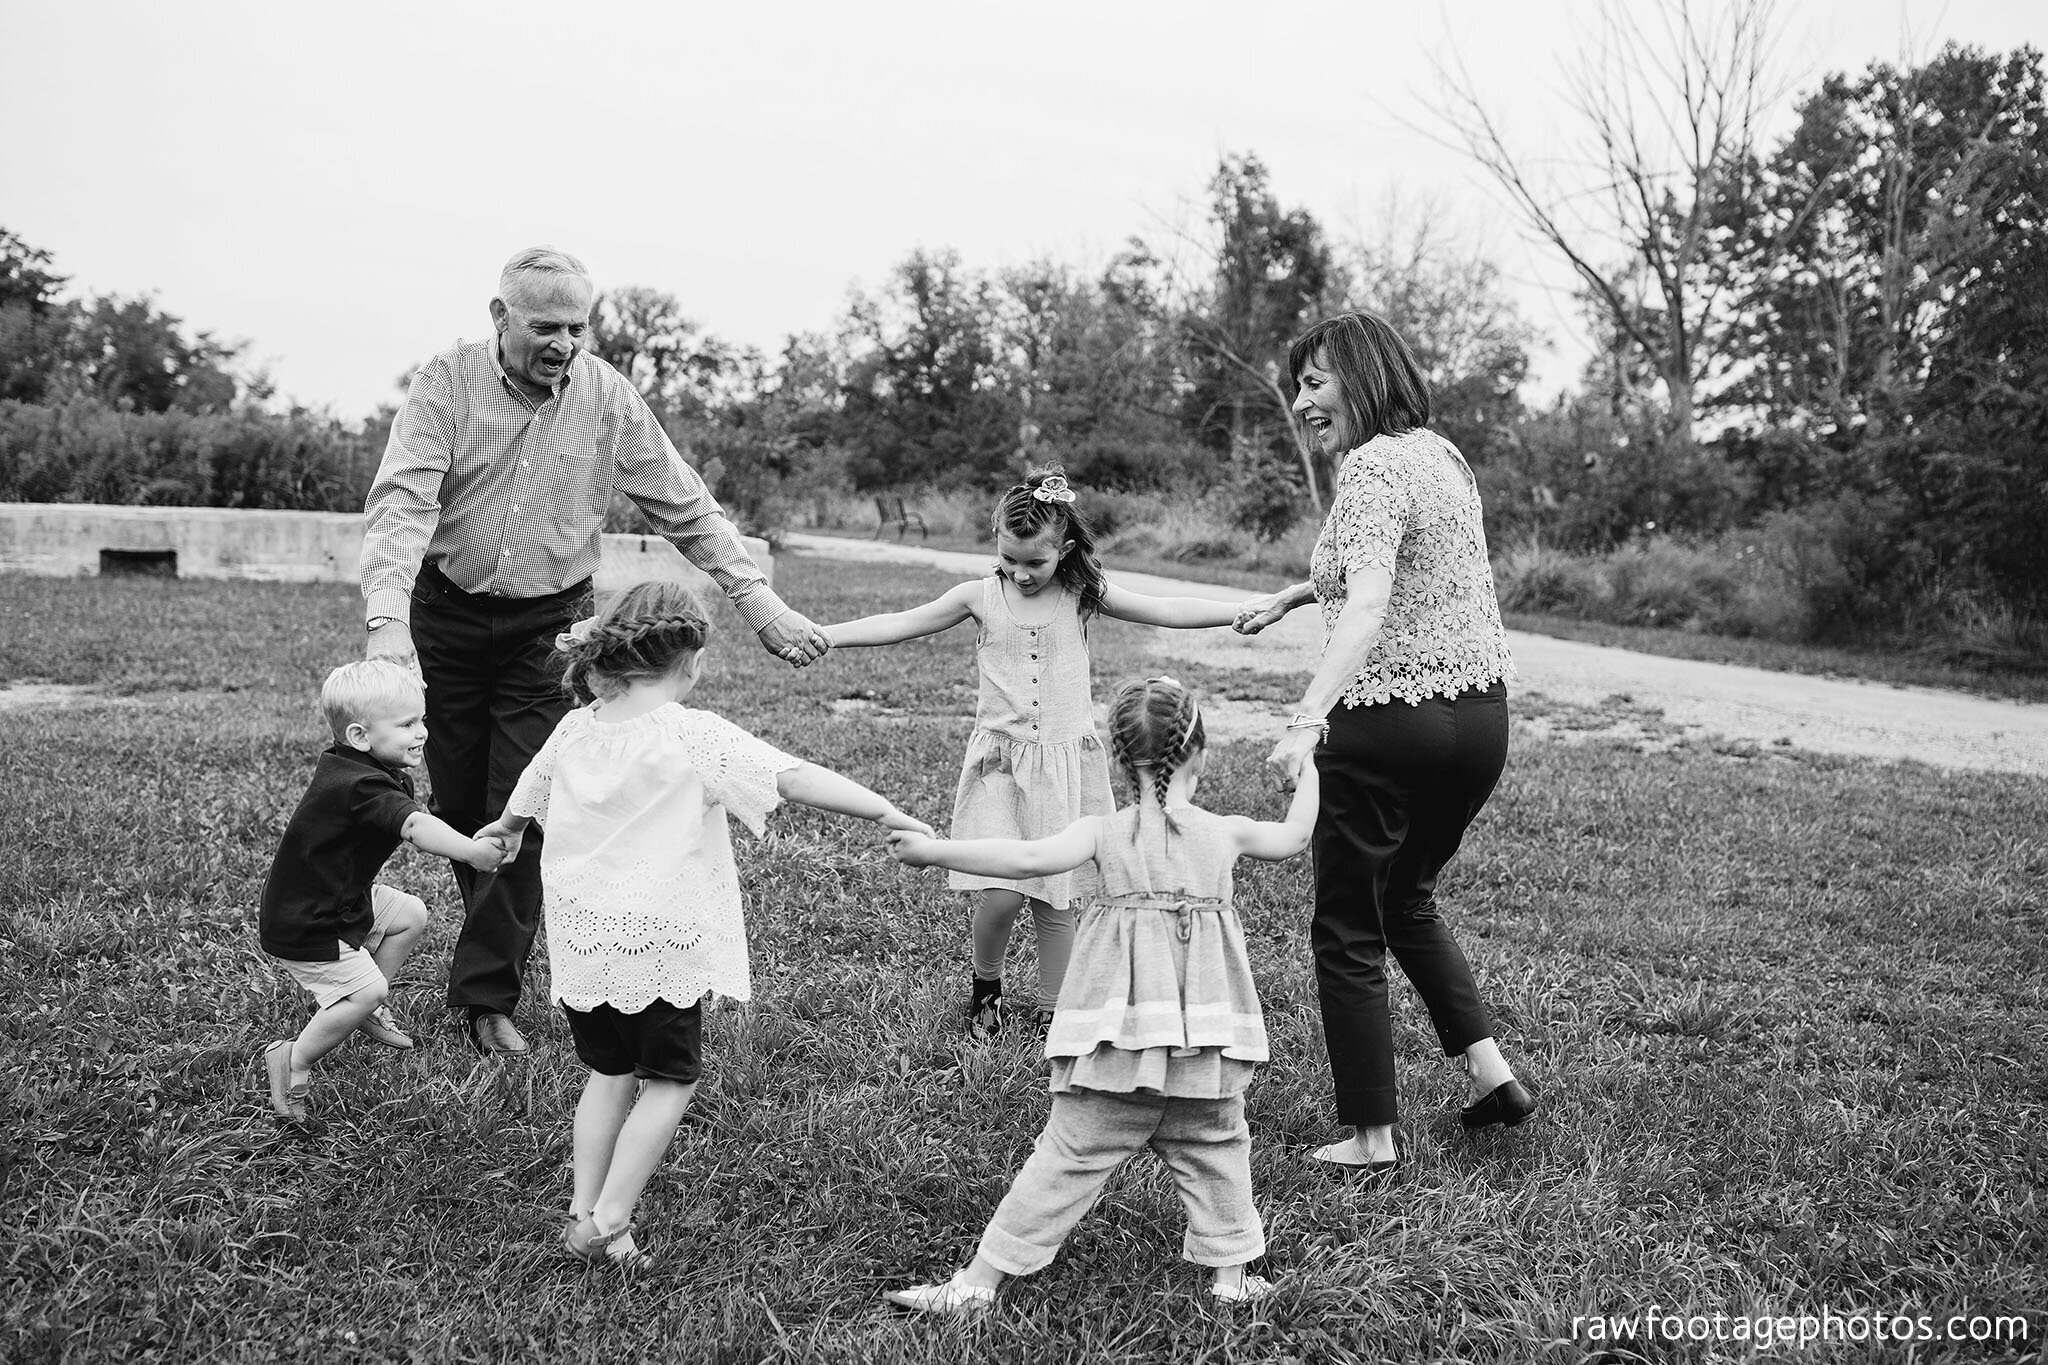 raw_footage_photography-london_ontario_family_photographer-woodsy_extended_family_session-grandparents-037.jpg